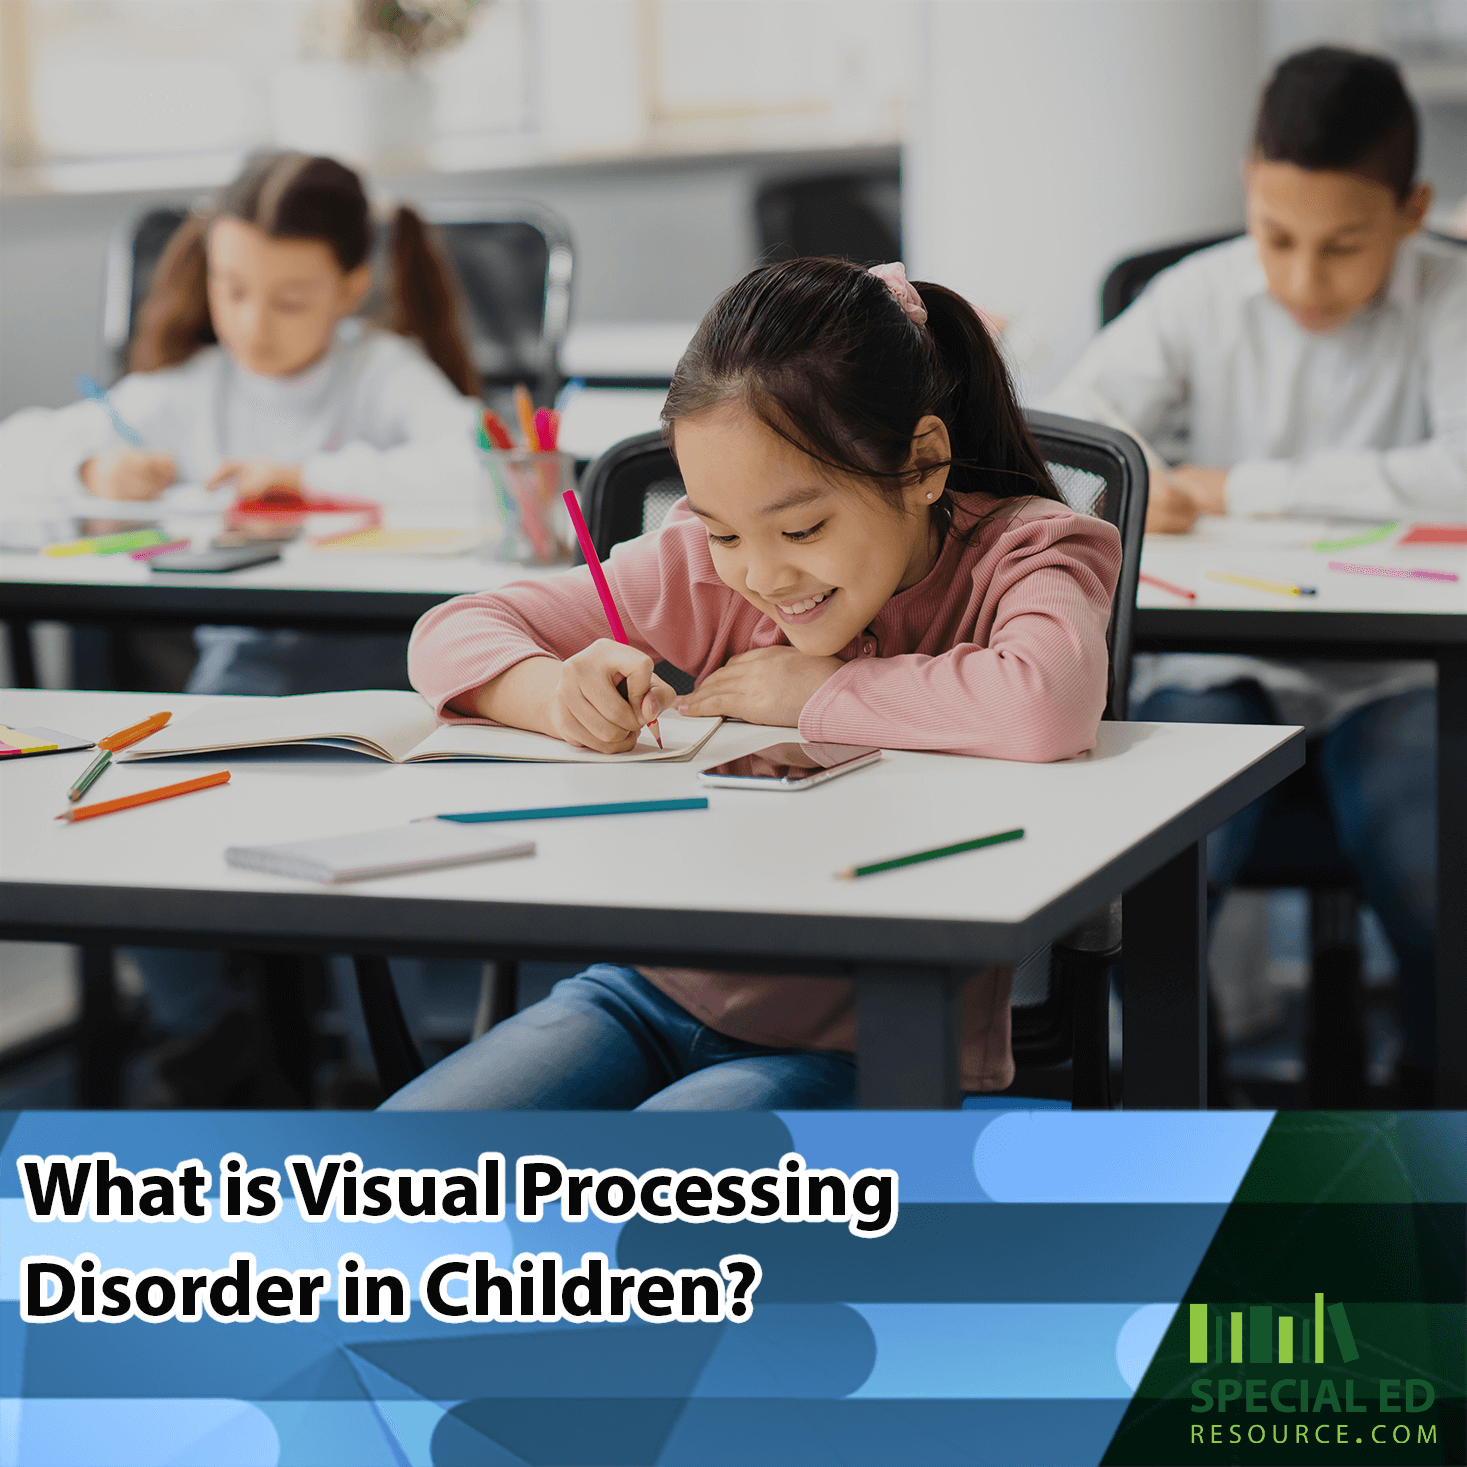 Three children sitting at desks in a classroom, engaged in their work. The foreground shows a smiling girl writing in a notebook with colored pencils scattered on the desk. The text overlay reads, 'What is Visual Processing Disorder in Children?' with the Special Ed Resource logo in the bottom right corner.